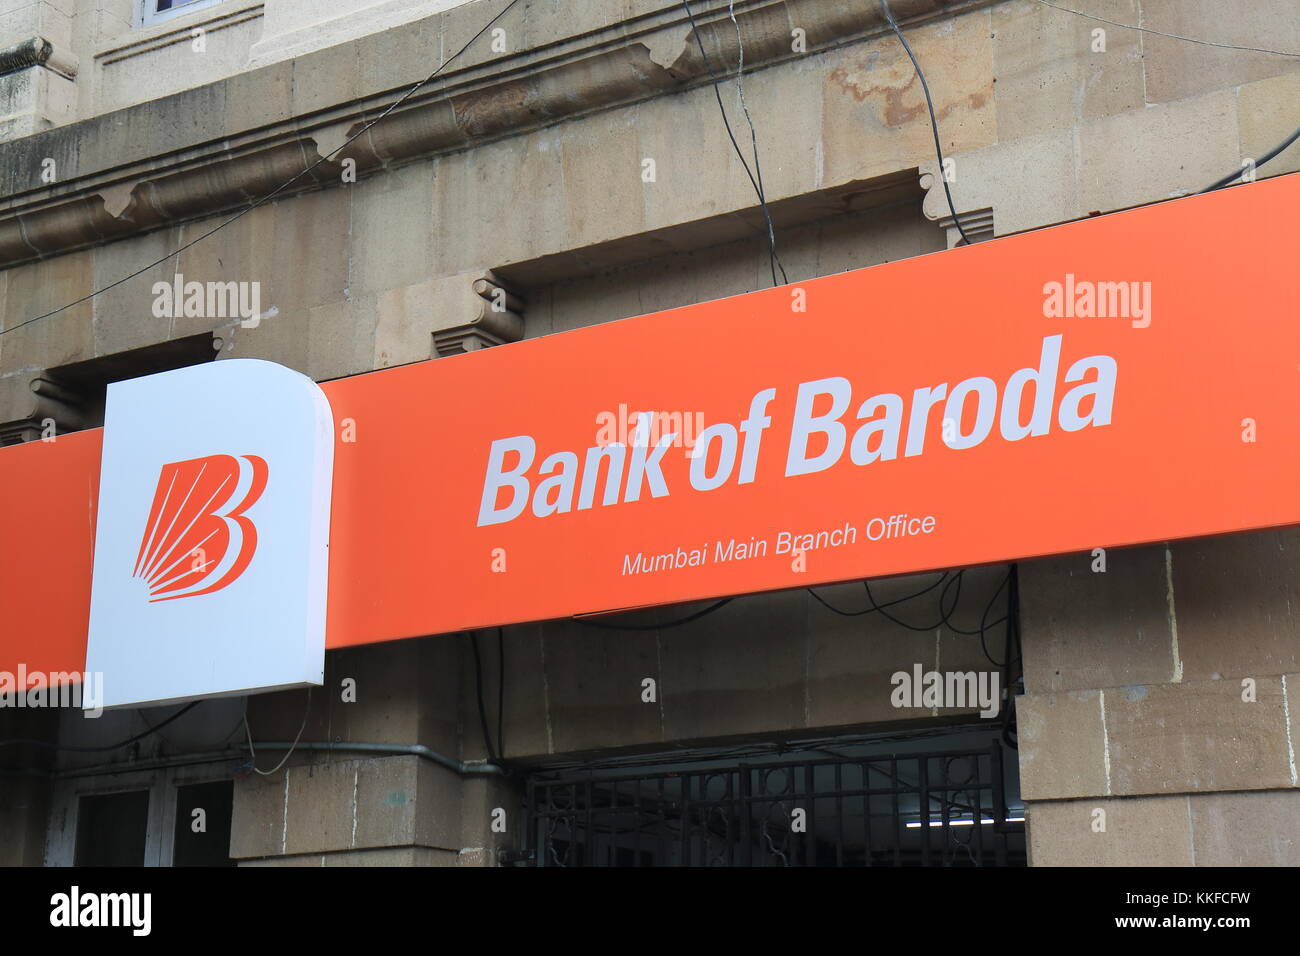 Bank of Baroda sign. Bank of Baroda is an Indian state-owned International banking and financial services company. Stock Photo